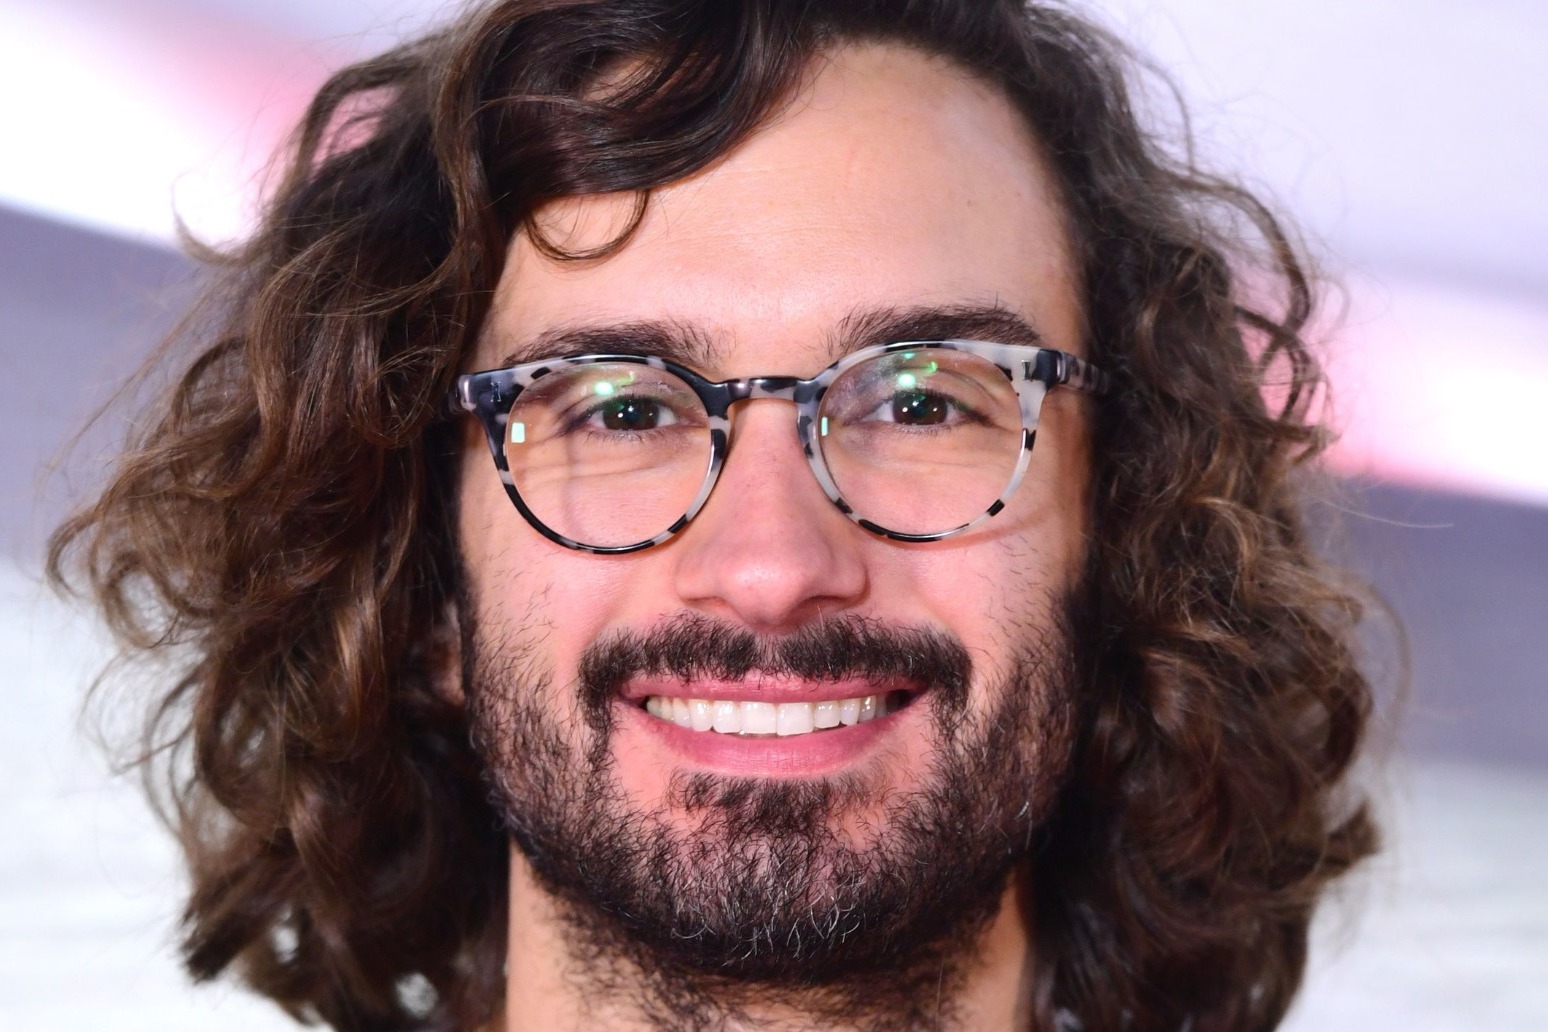 Joe Wicks raises £200,000 for the NHS with online PE class 